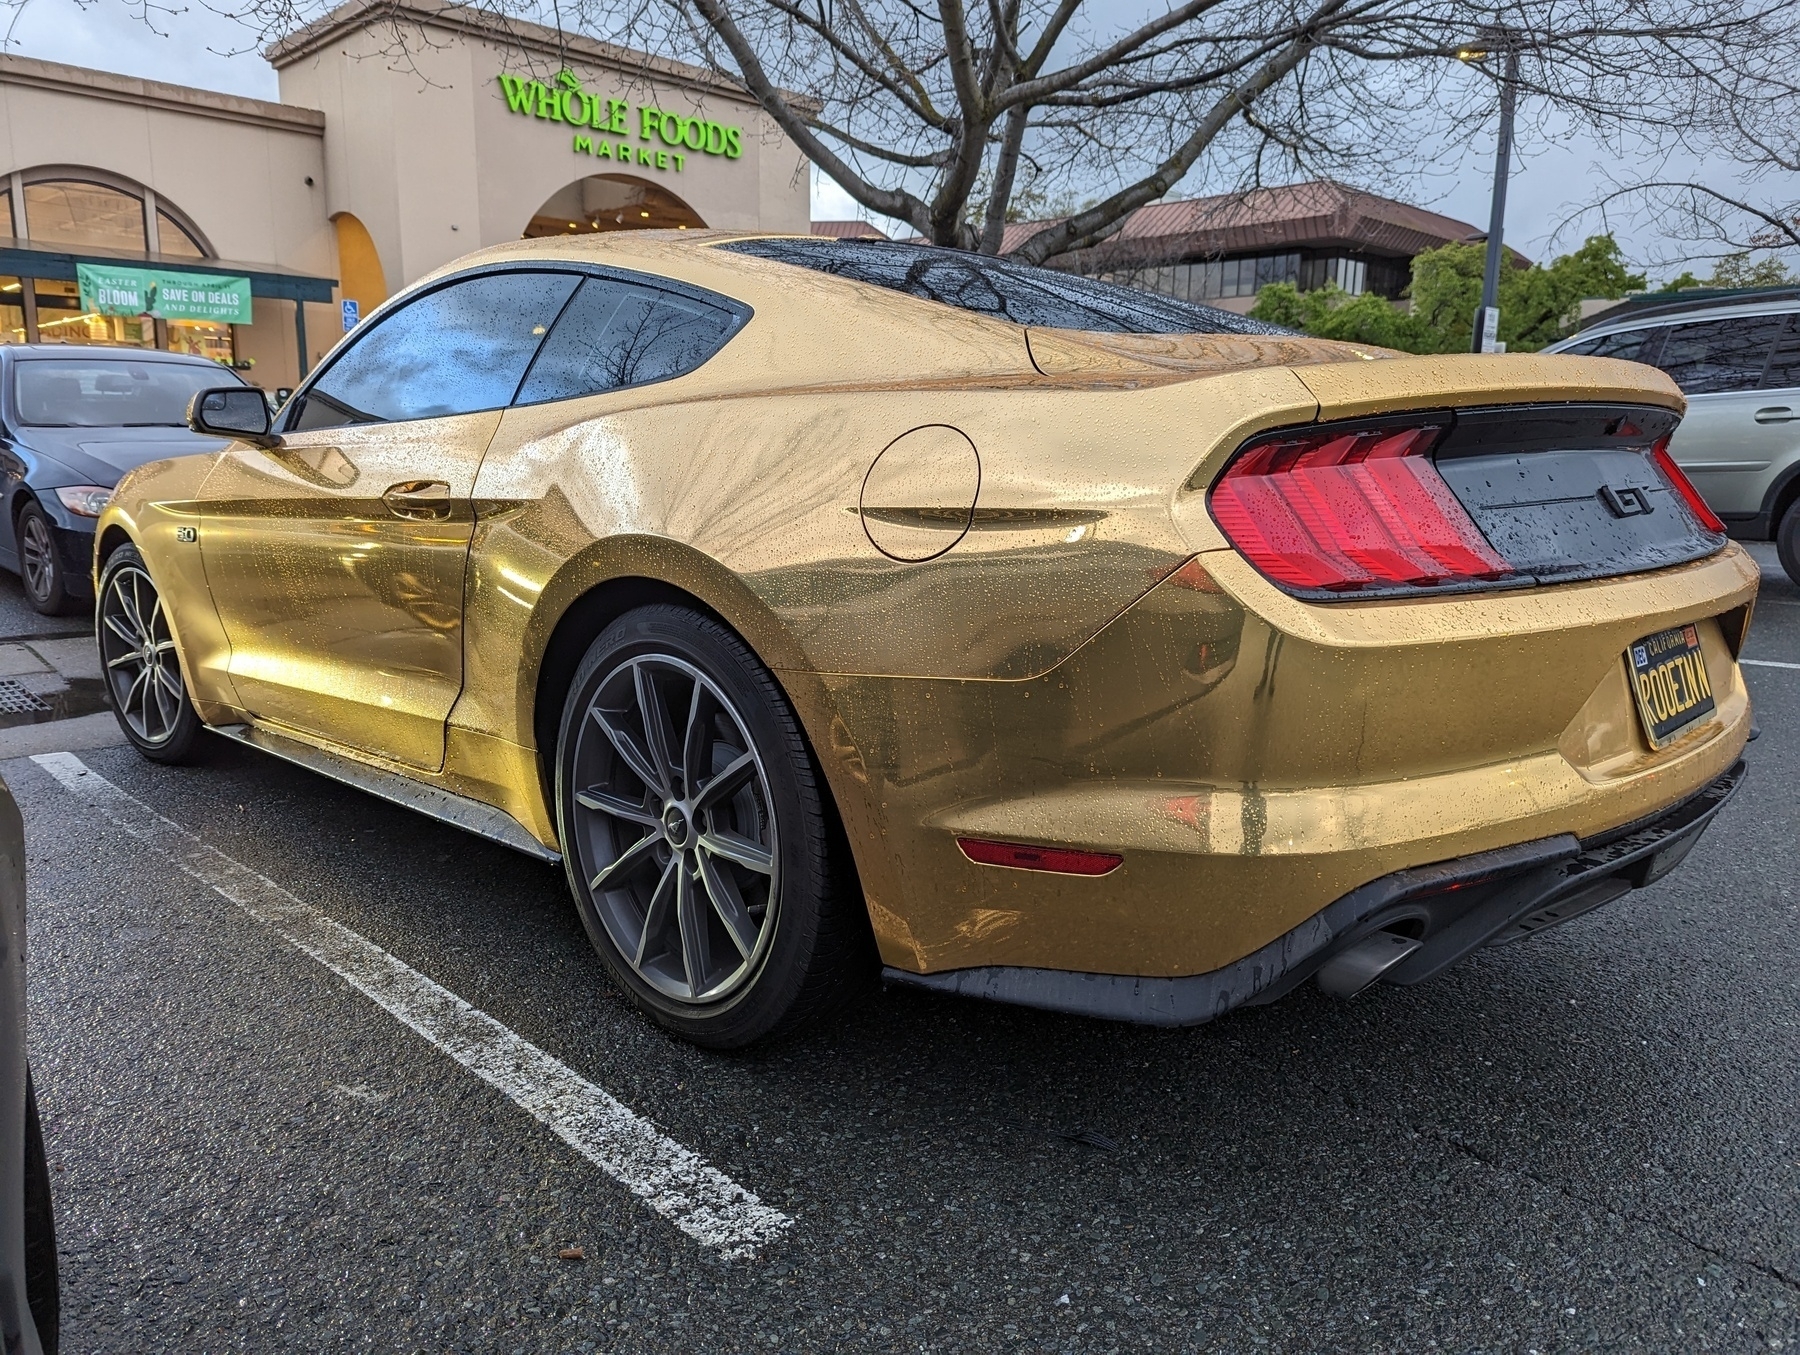 A metallic gold plated Ford Mustang sitting in a parking lot outside a Whole Foods Market grocery store Wednesday, March 29, 2023 in Walnut Creek, California.